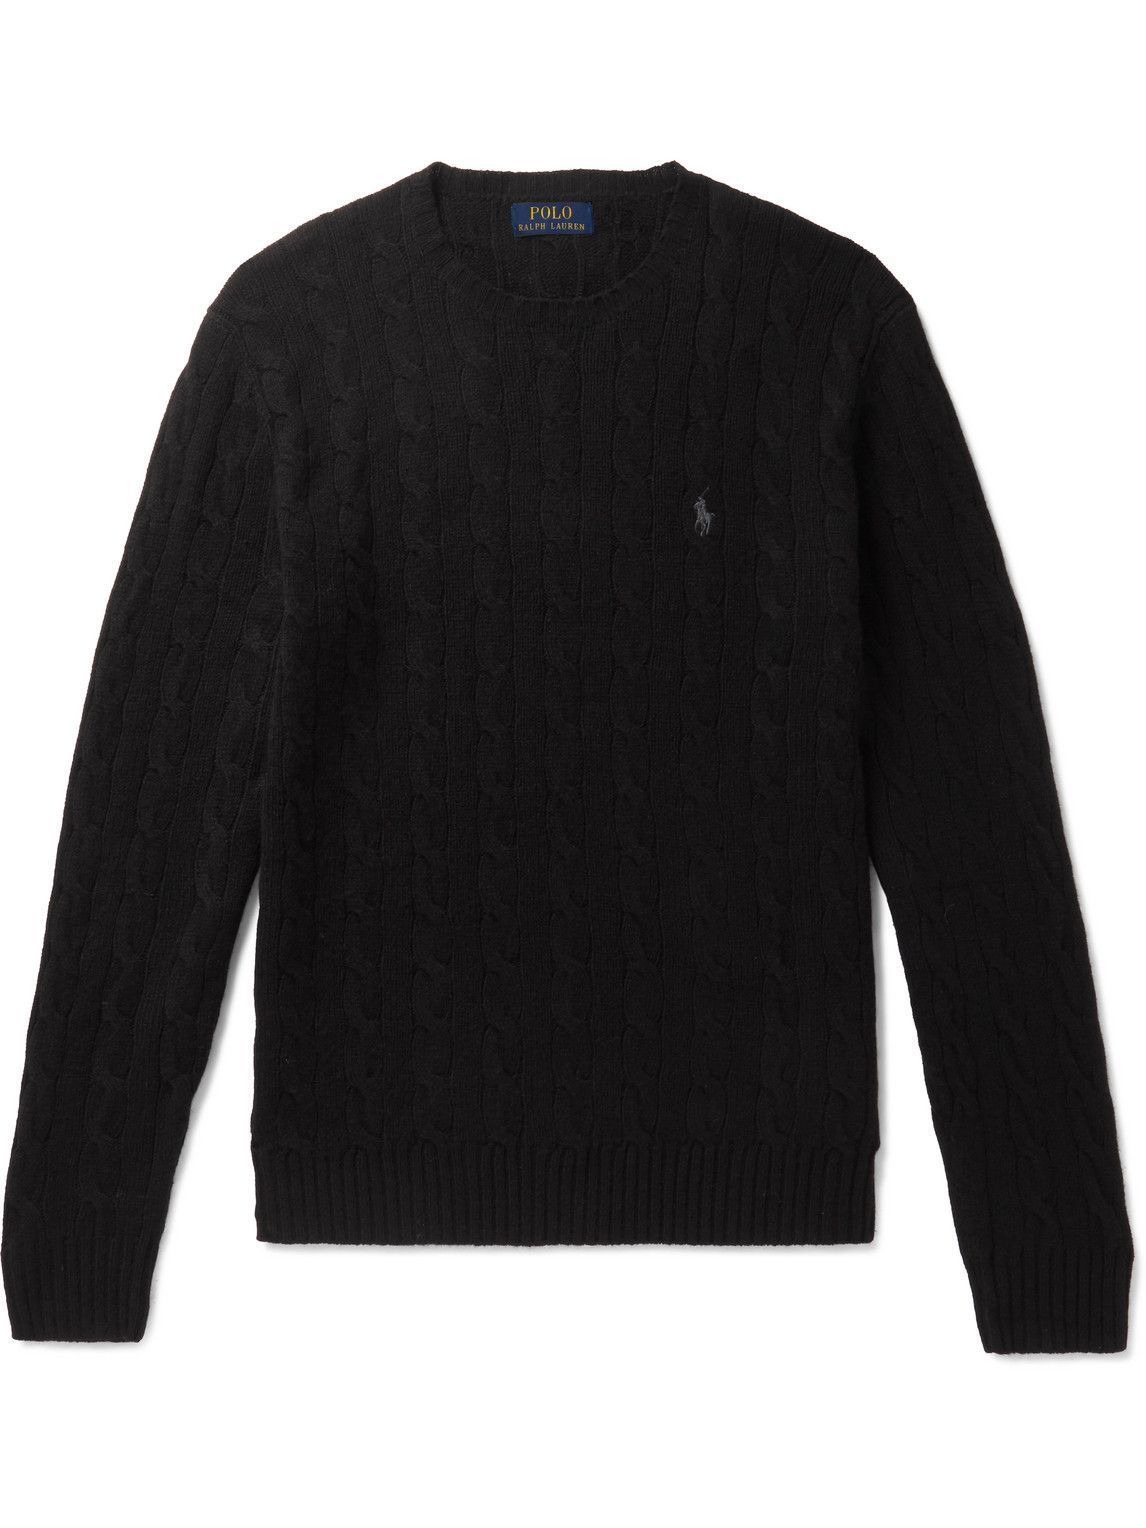 Uforglemmelig Bungalow damp Polo Ralph Lauren - Cable-Knit Merino Wool and Cashmere-Blend Sweater - Black  Polo Ralph Lauren